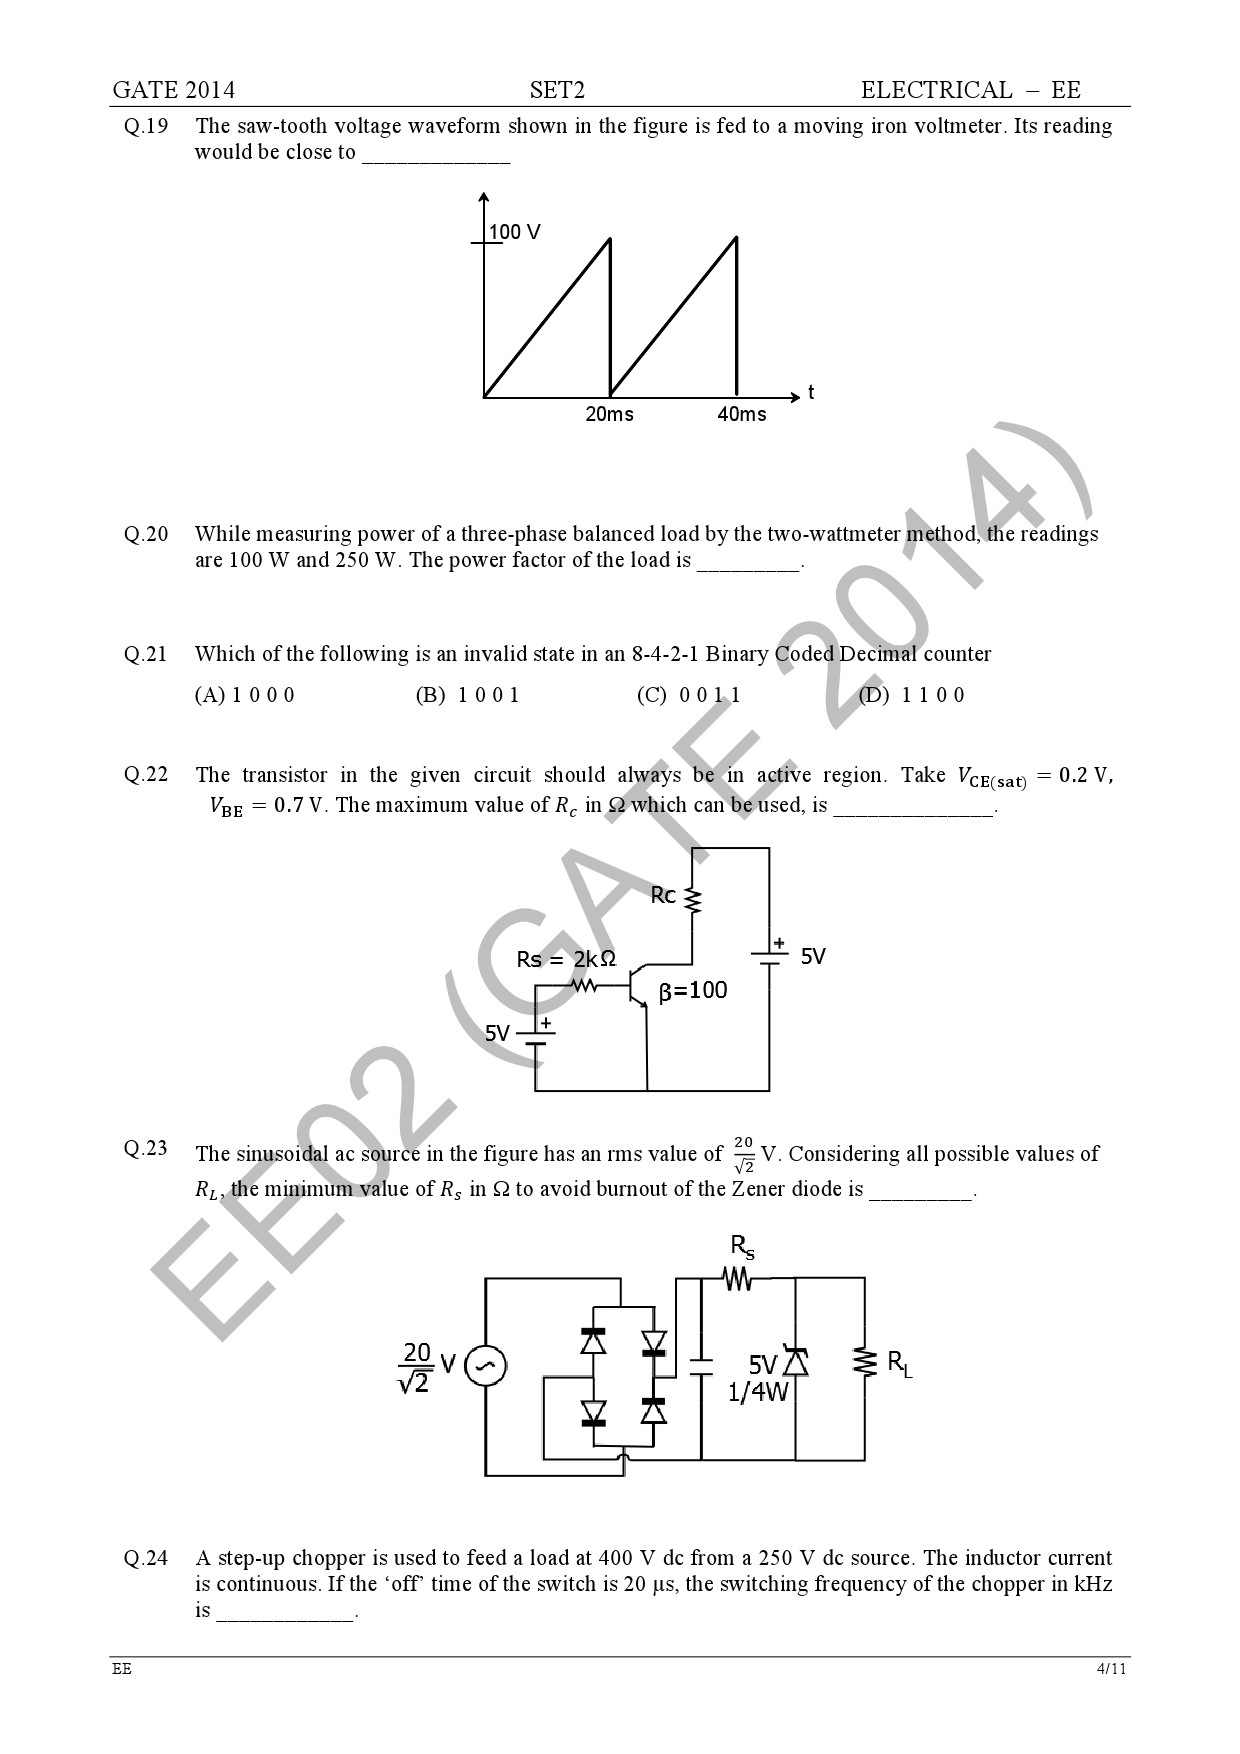 GATE Exam Question Paper 2014 Electrical Engineering Set 2 10